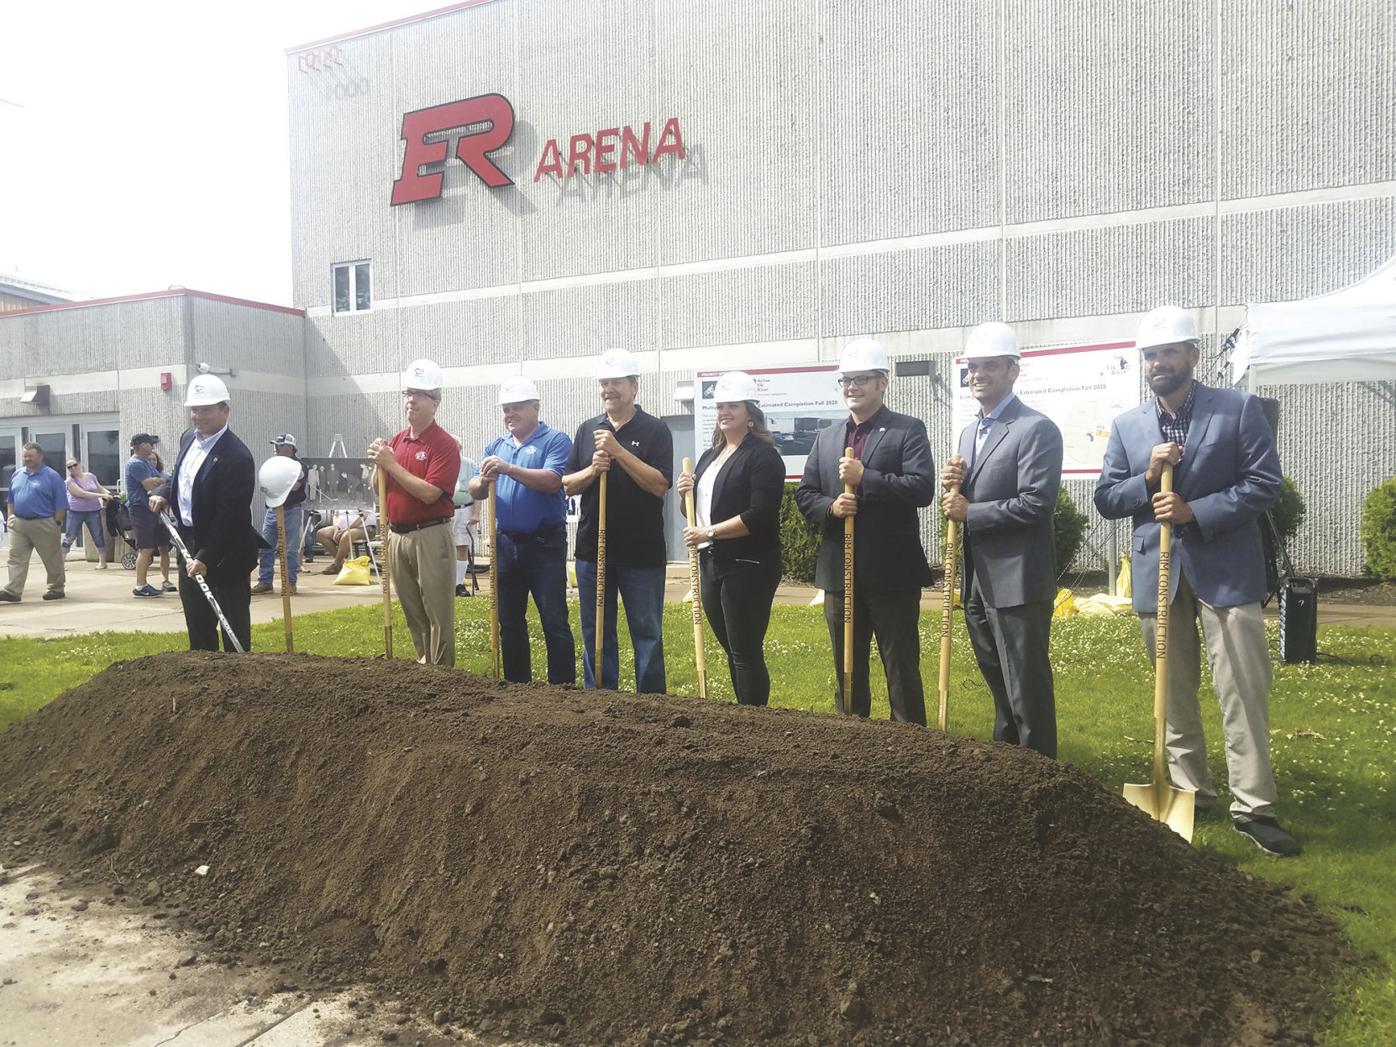 arena groundbreaking_just the council.jpg